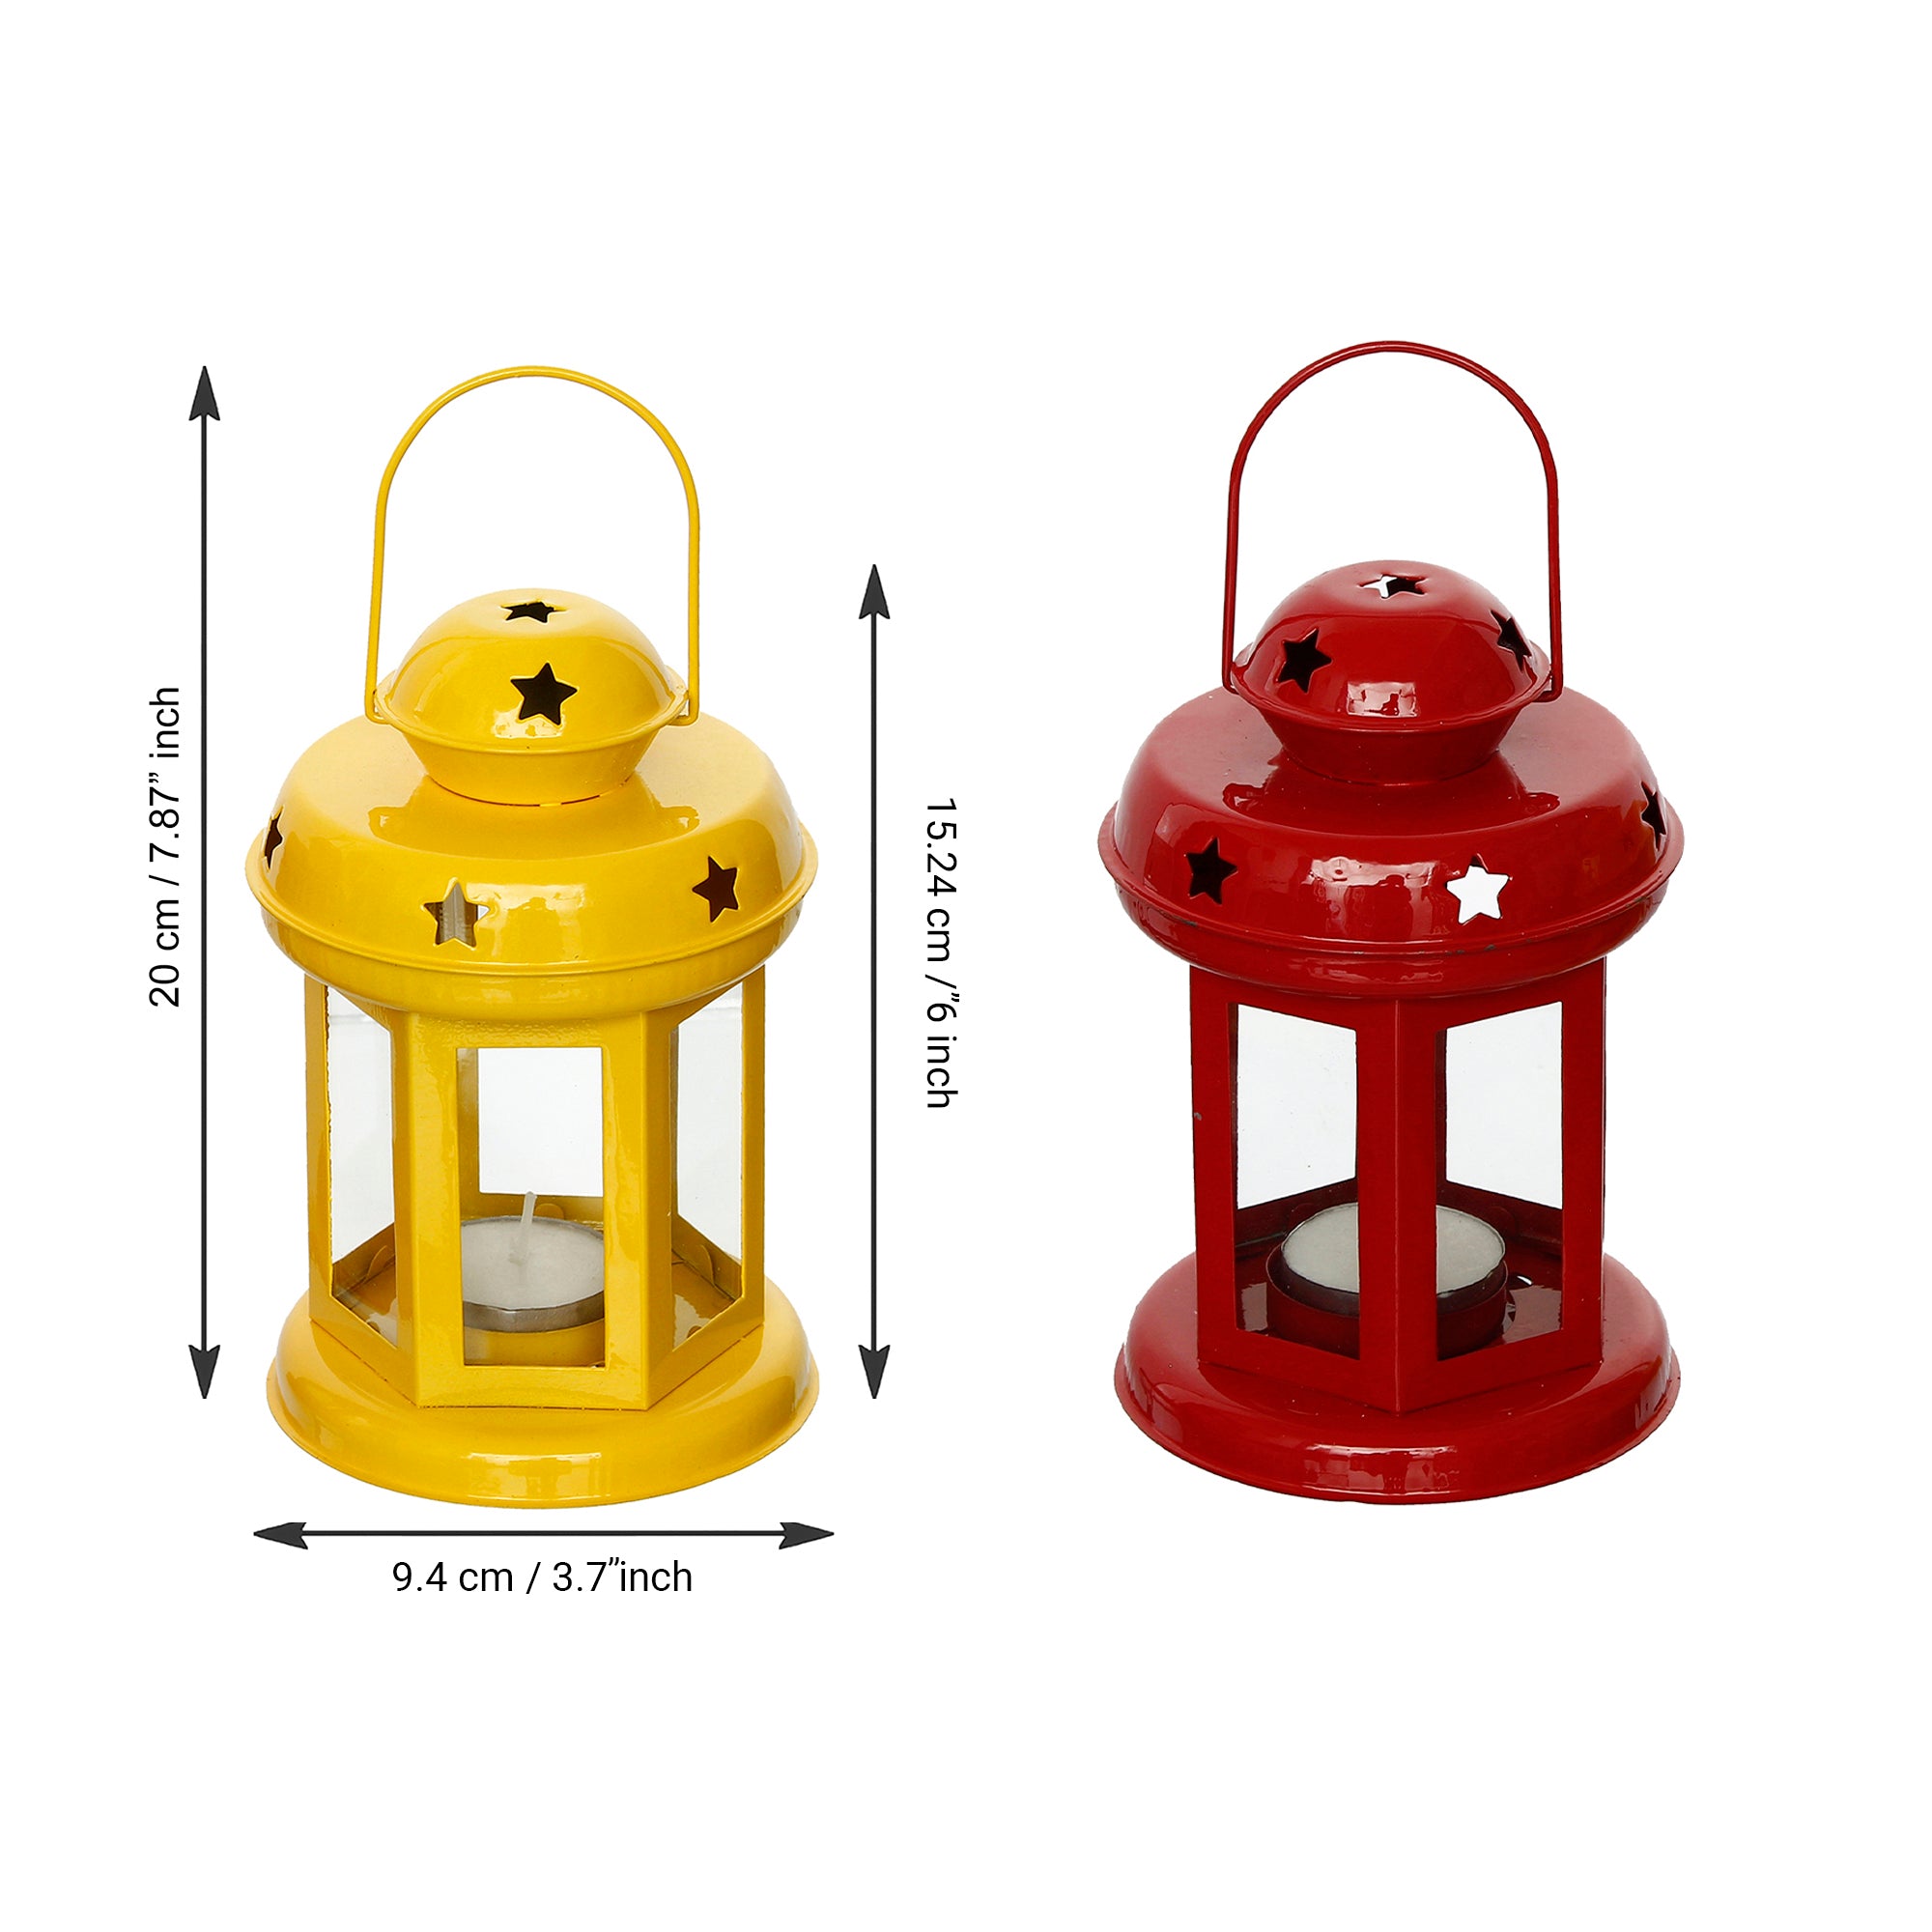 Iron Set of 2 Yellow and Red tea light candle holder Lantern 3